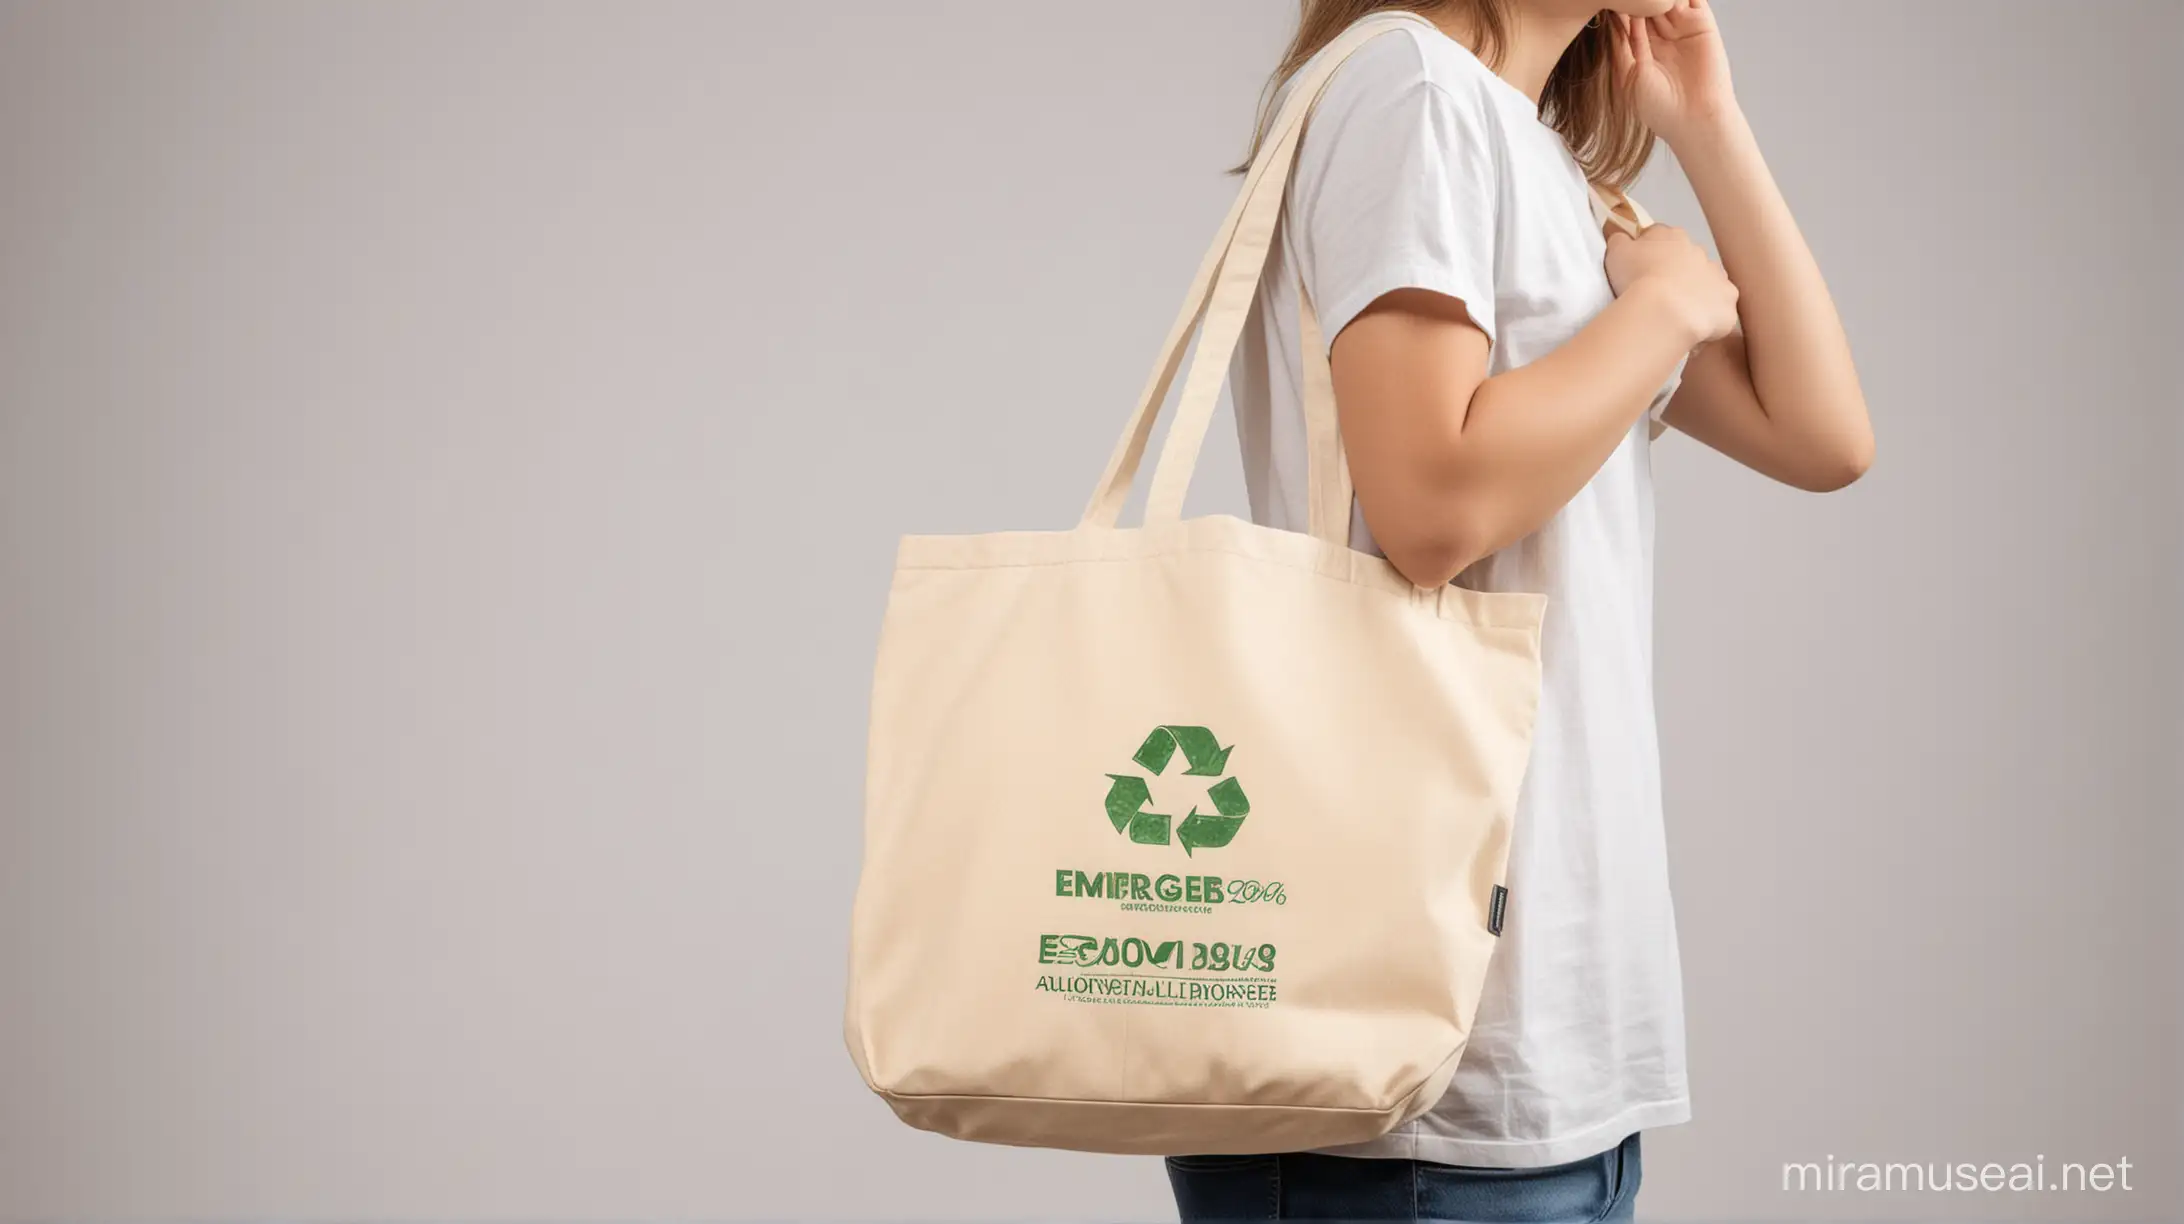 teenager with eco tote bag on shoulder side view light background mockup photo